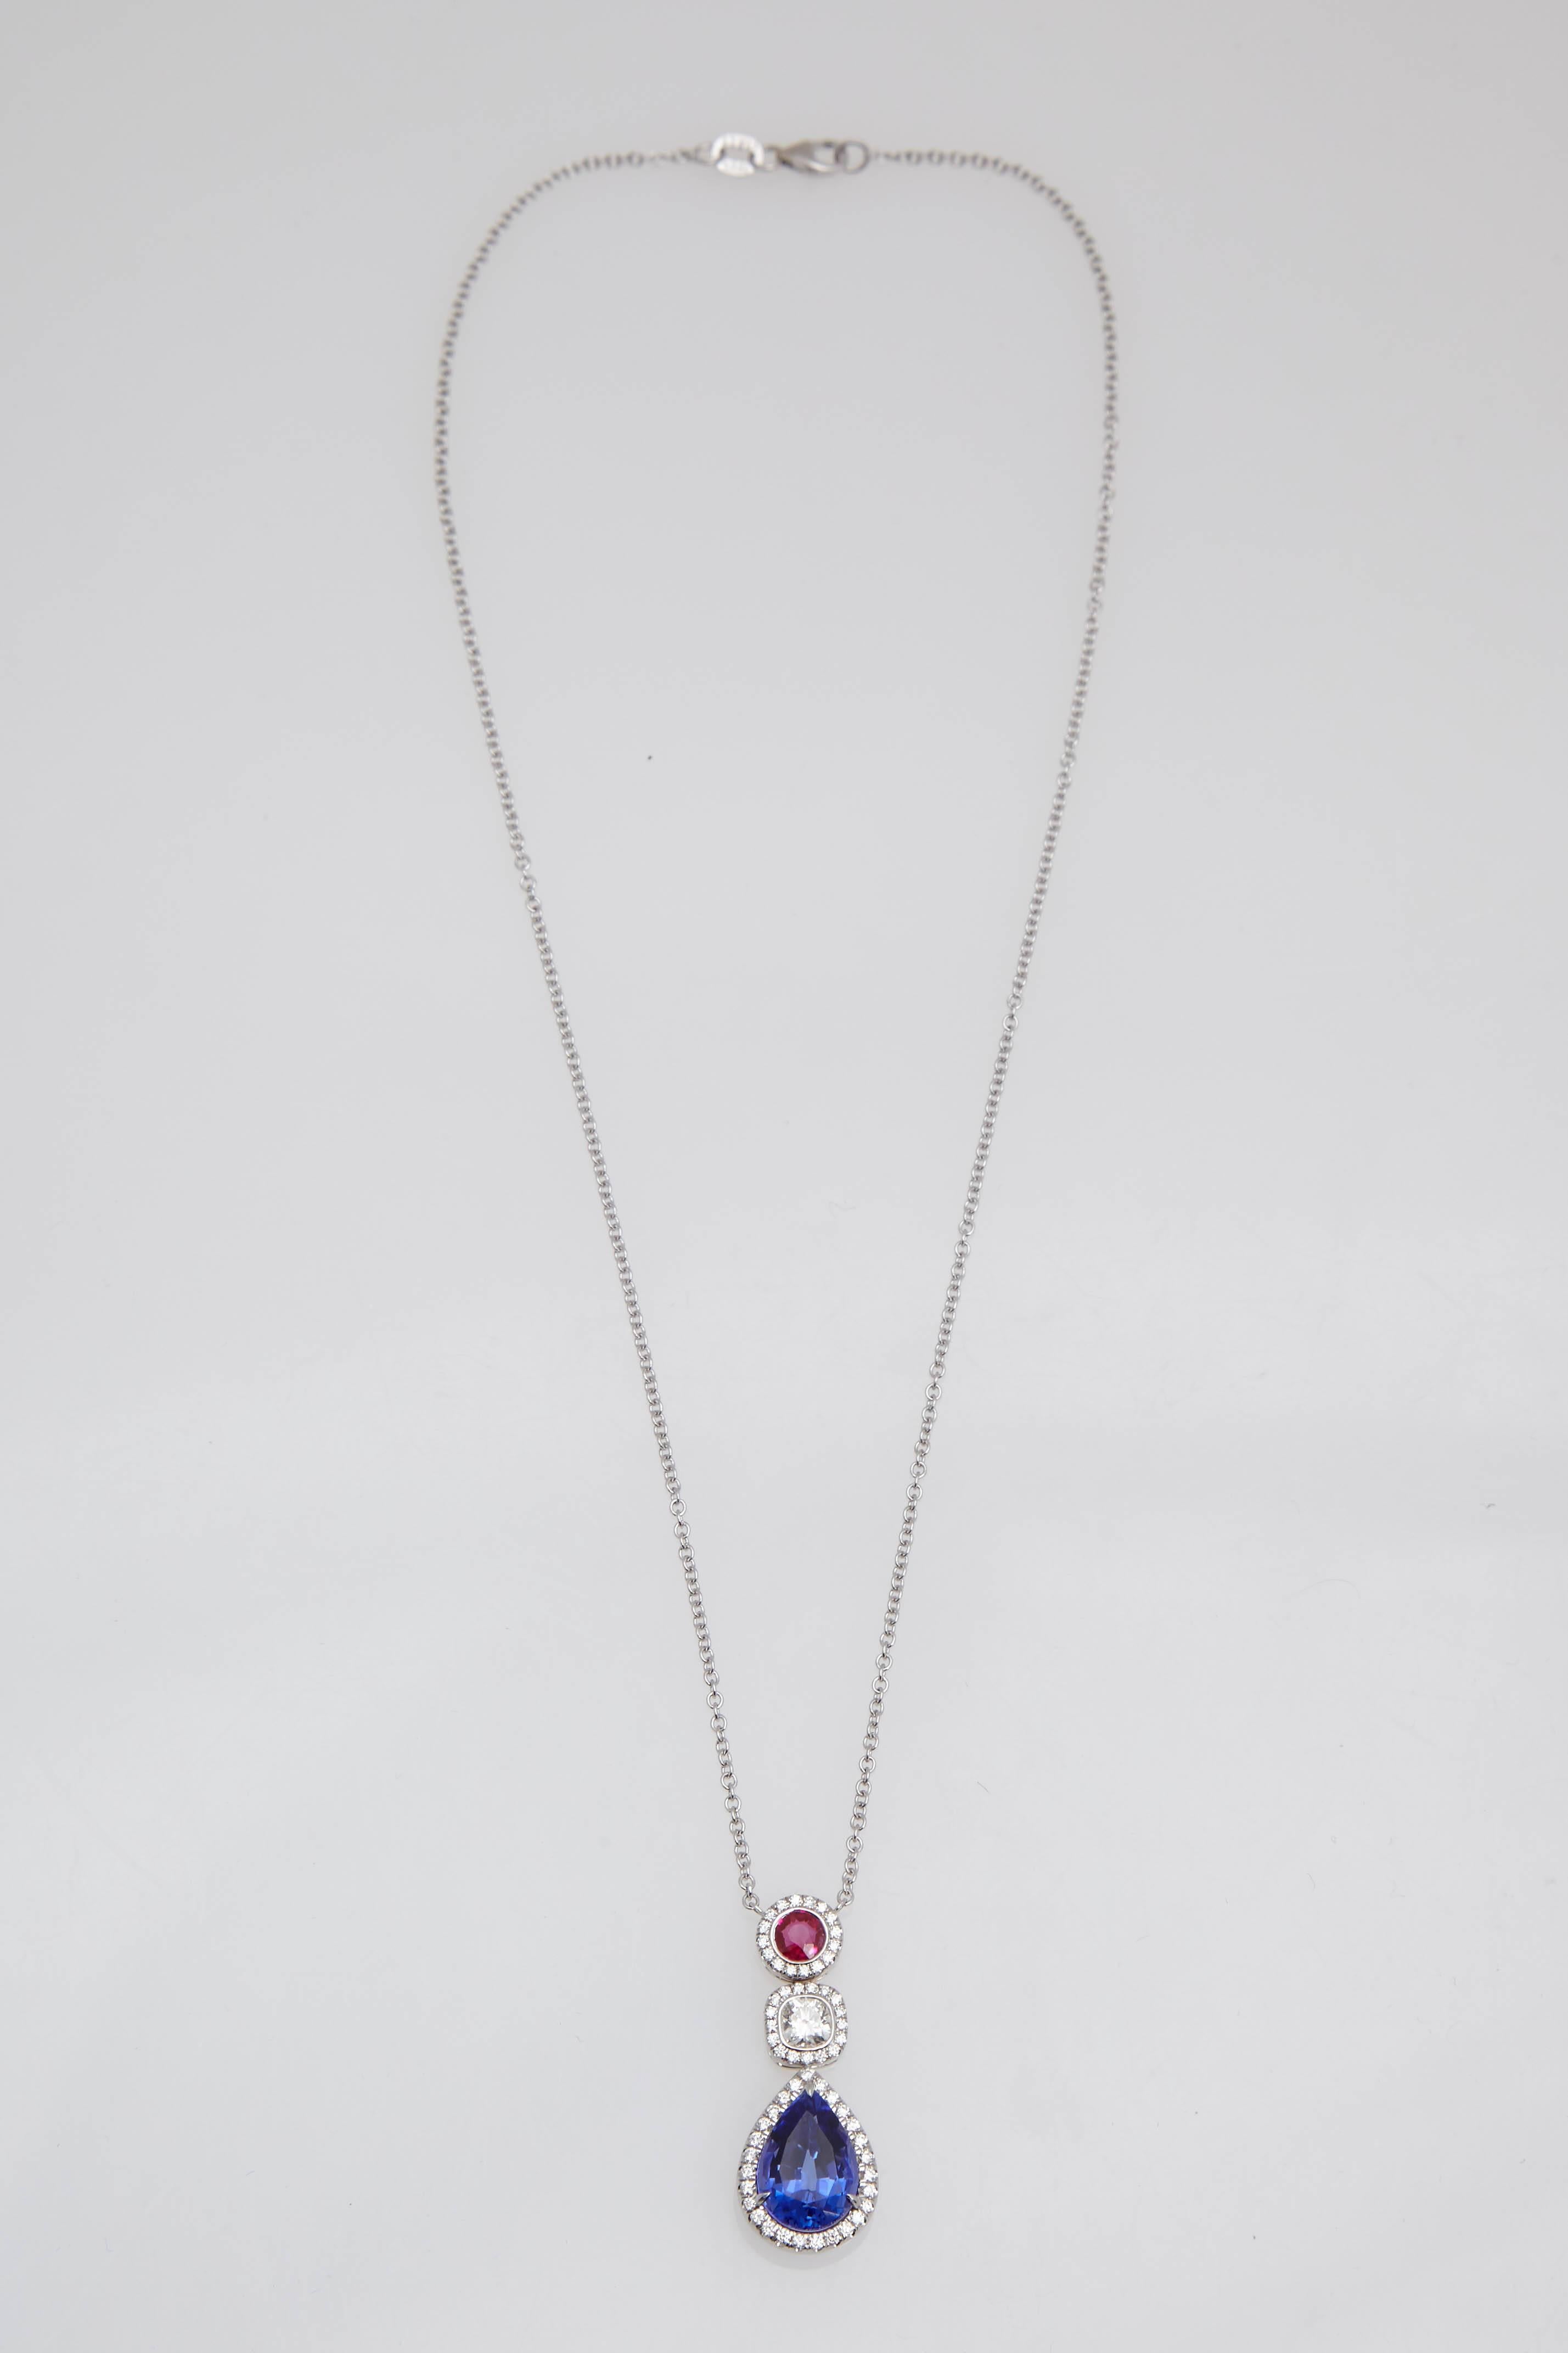 18 Karat white gold tanzanite, diamond, and ruby necklace consisting of 4.36 carat pear shaped tanzanite, 0.37 carat cushion shaped diamond, and a 0.37 carat round Burmese ruby enhanced by 57 round brilliant cut diamonds weighing 0.44 carat. The